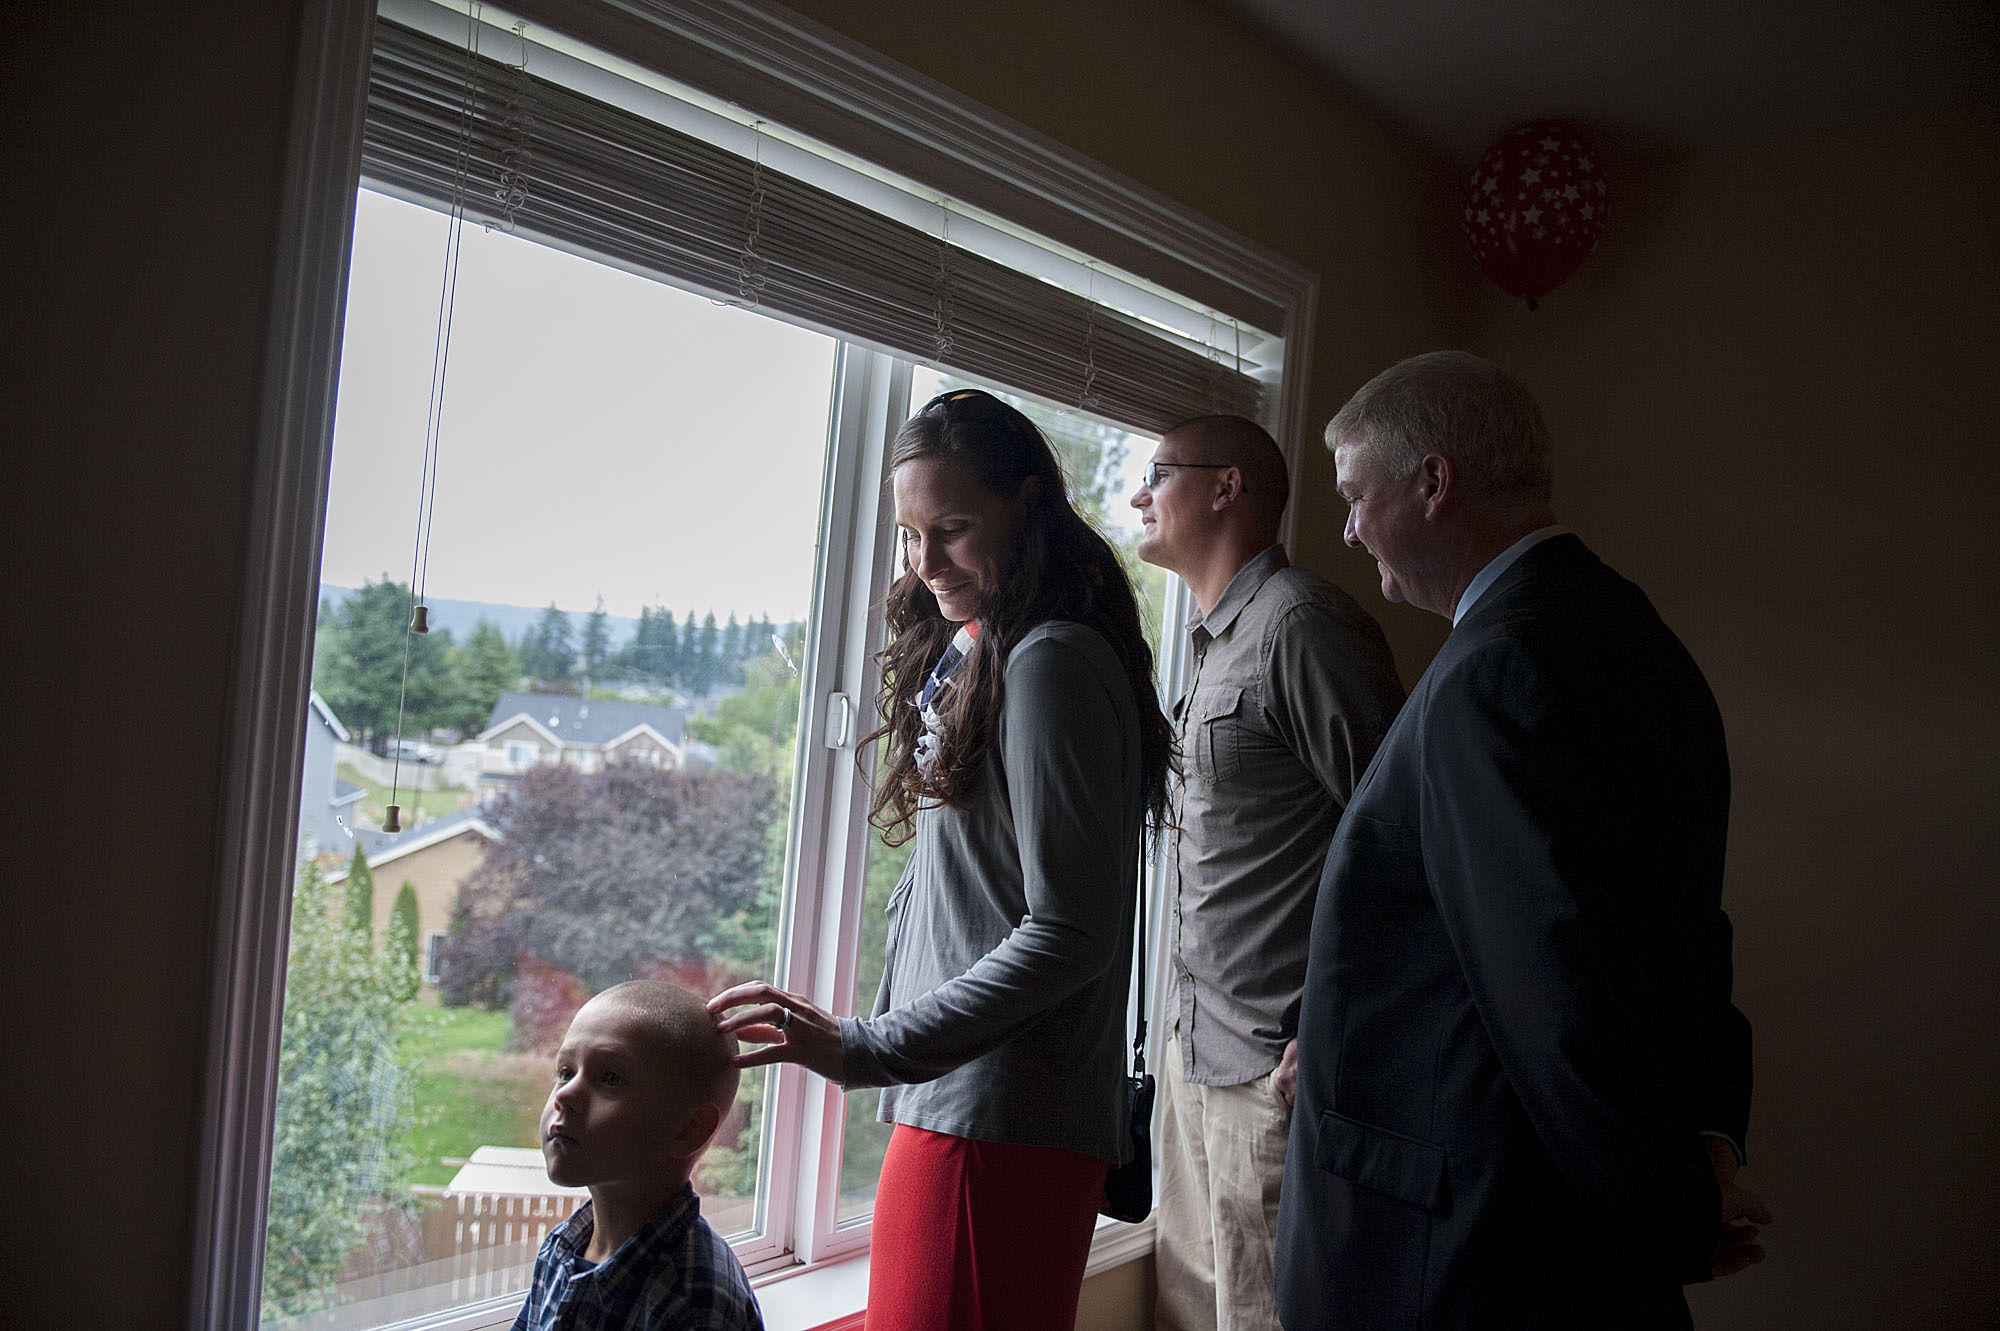 Staff Sgt. Corey Collins, second from right, checks out the view from a window on the second floor of his new Washougal home with his son, Liam, 5, and his wife, Katie, and Thomas Kilgannon, president of Freedom Alliance.